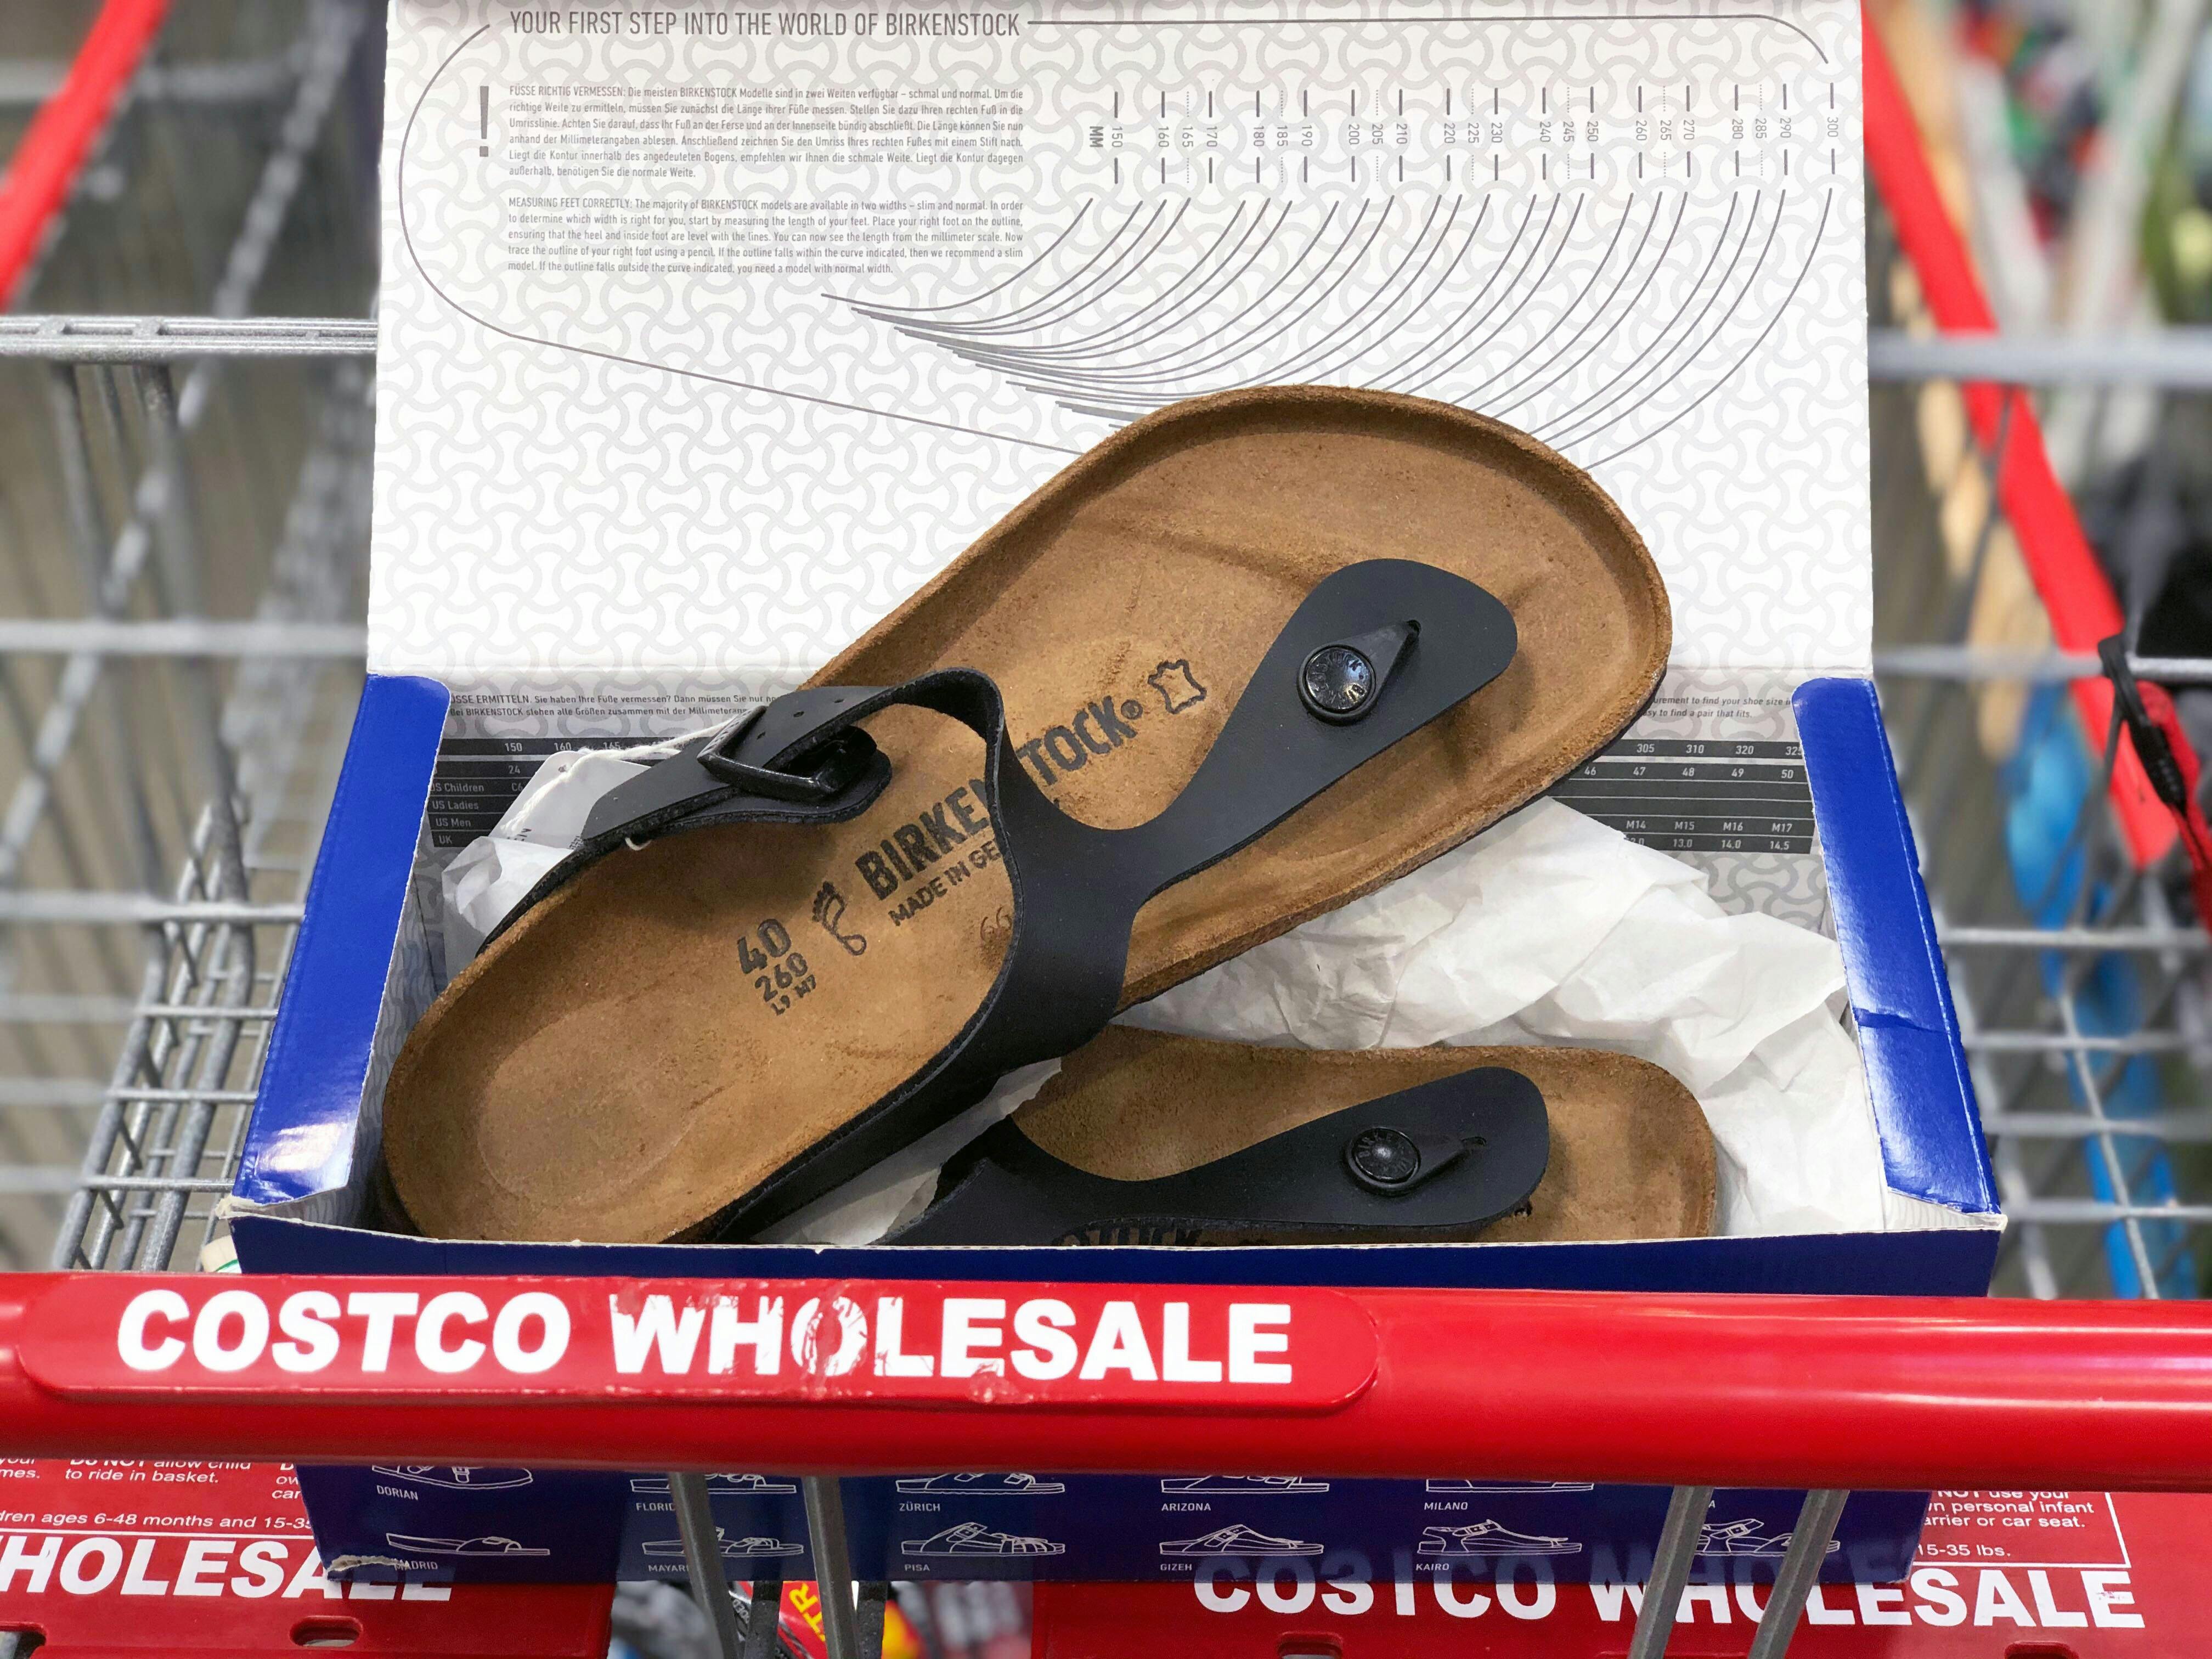 A pair of Birkenstock sandals in a shoebox sitting in the basket of a Costco shopping cart.